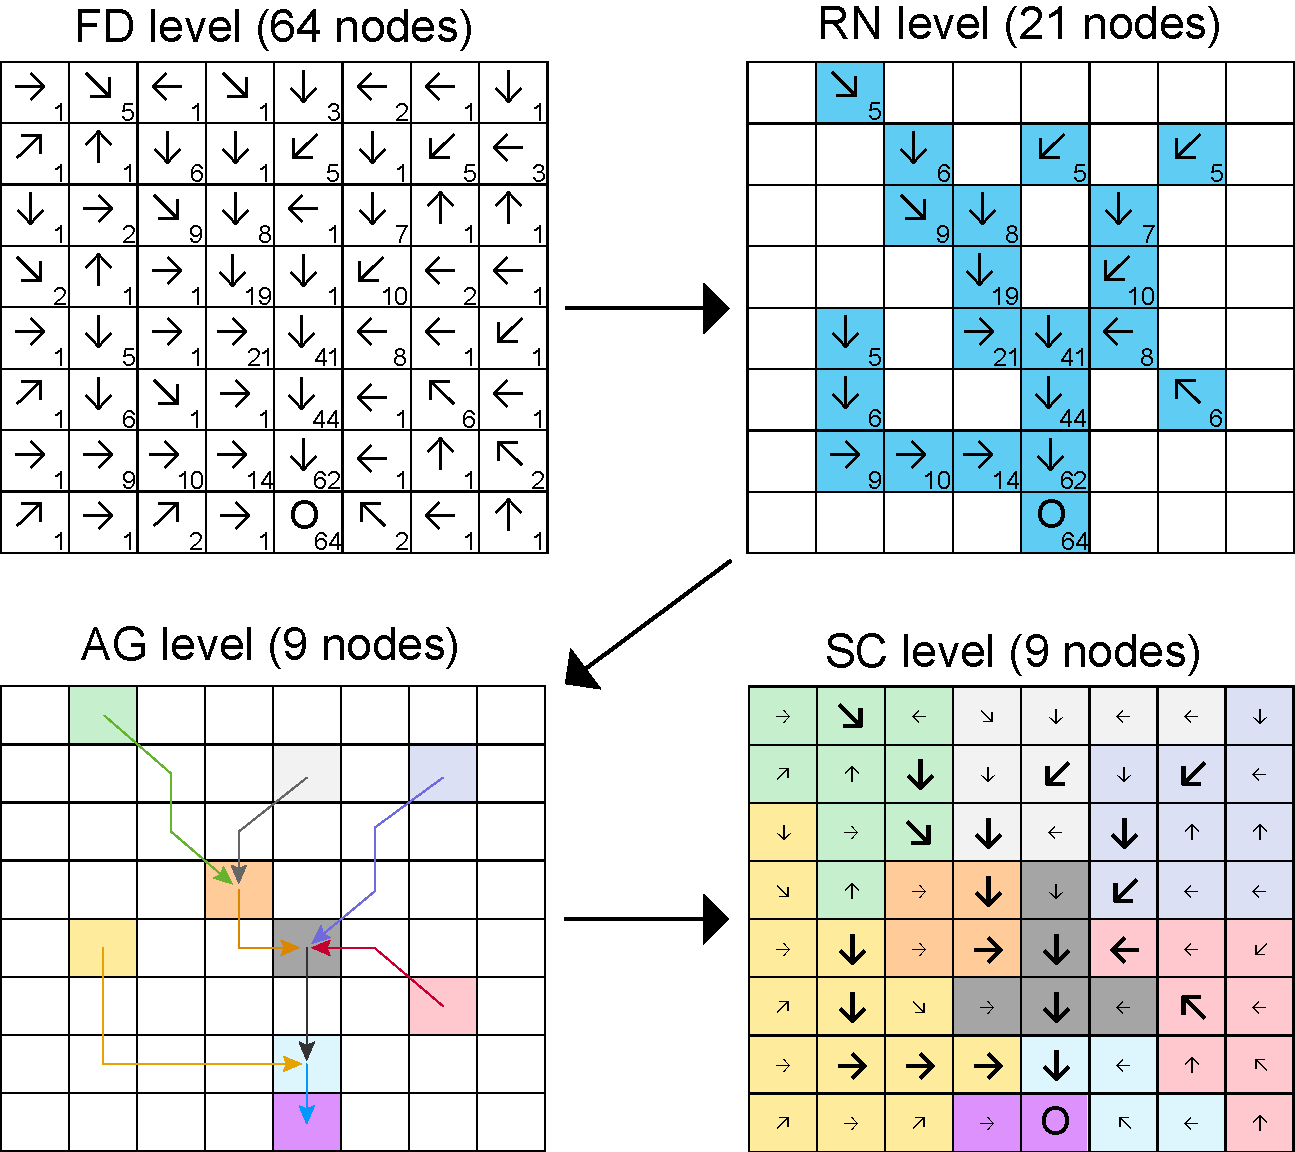 Representation of the different aggregation levels at which the network is defined (excluding the null levels N4 and N8). The example is obtained from a single-outlet 8x8 lattice. Letter 'O' identifies the outlet pixel. Arrows on the other pixels identify flow directions. Numbers represent the cumulative drainage area (in number of pixels). At the FD level, all 64 pixels belong to the network^[Note that this pattern of flow directions was not derived by an OCN search algortihm, but rather drawn manually for illustration purposes.]. To obtain the RN level, a threshold value of 5 on drainage area is applied to distinguish pixels belonging to the river network. The network at the AG level consists of 9 nodes. The SC level is obtained by splitting the lattice into portions whose pixels drain into the AG nodes and edges. In this example, because there is only one outlet, all pixels belong to a single node at the CM level.